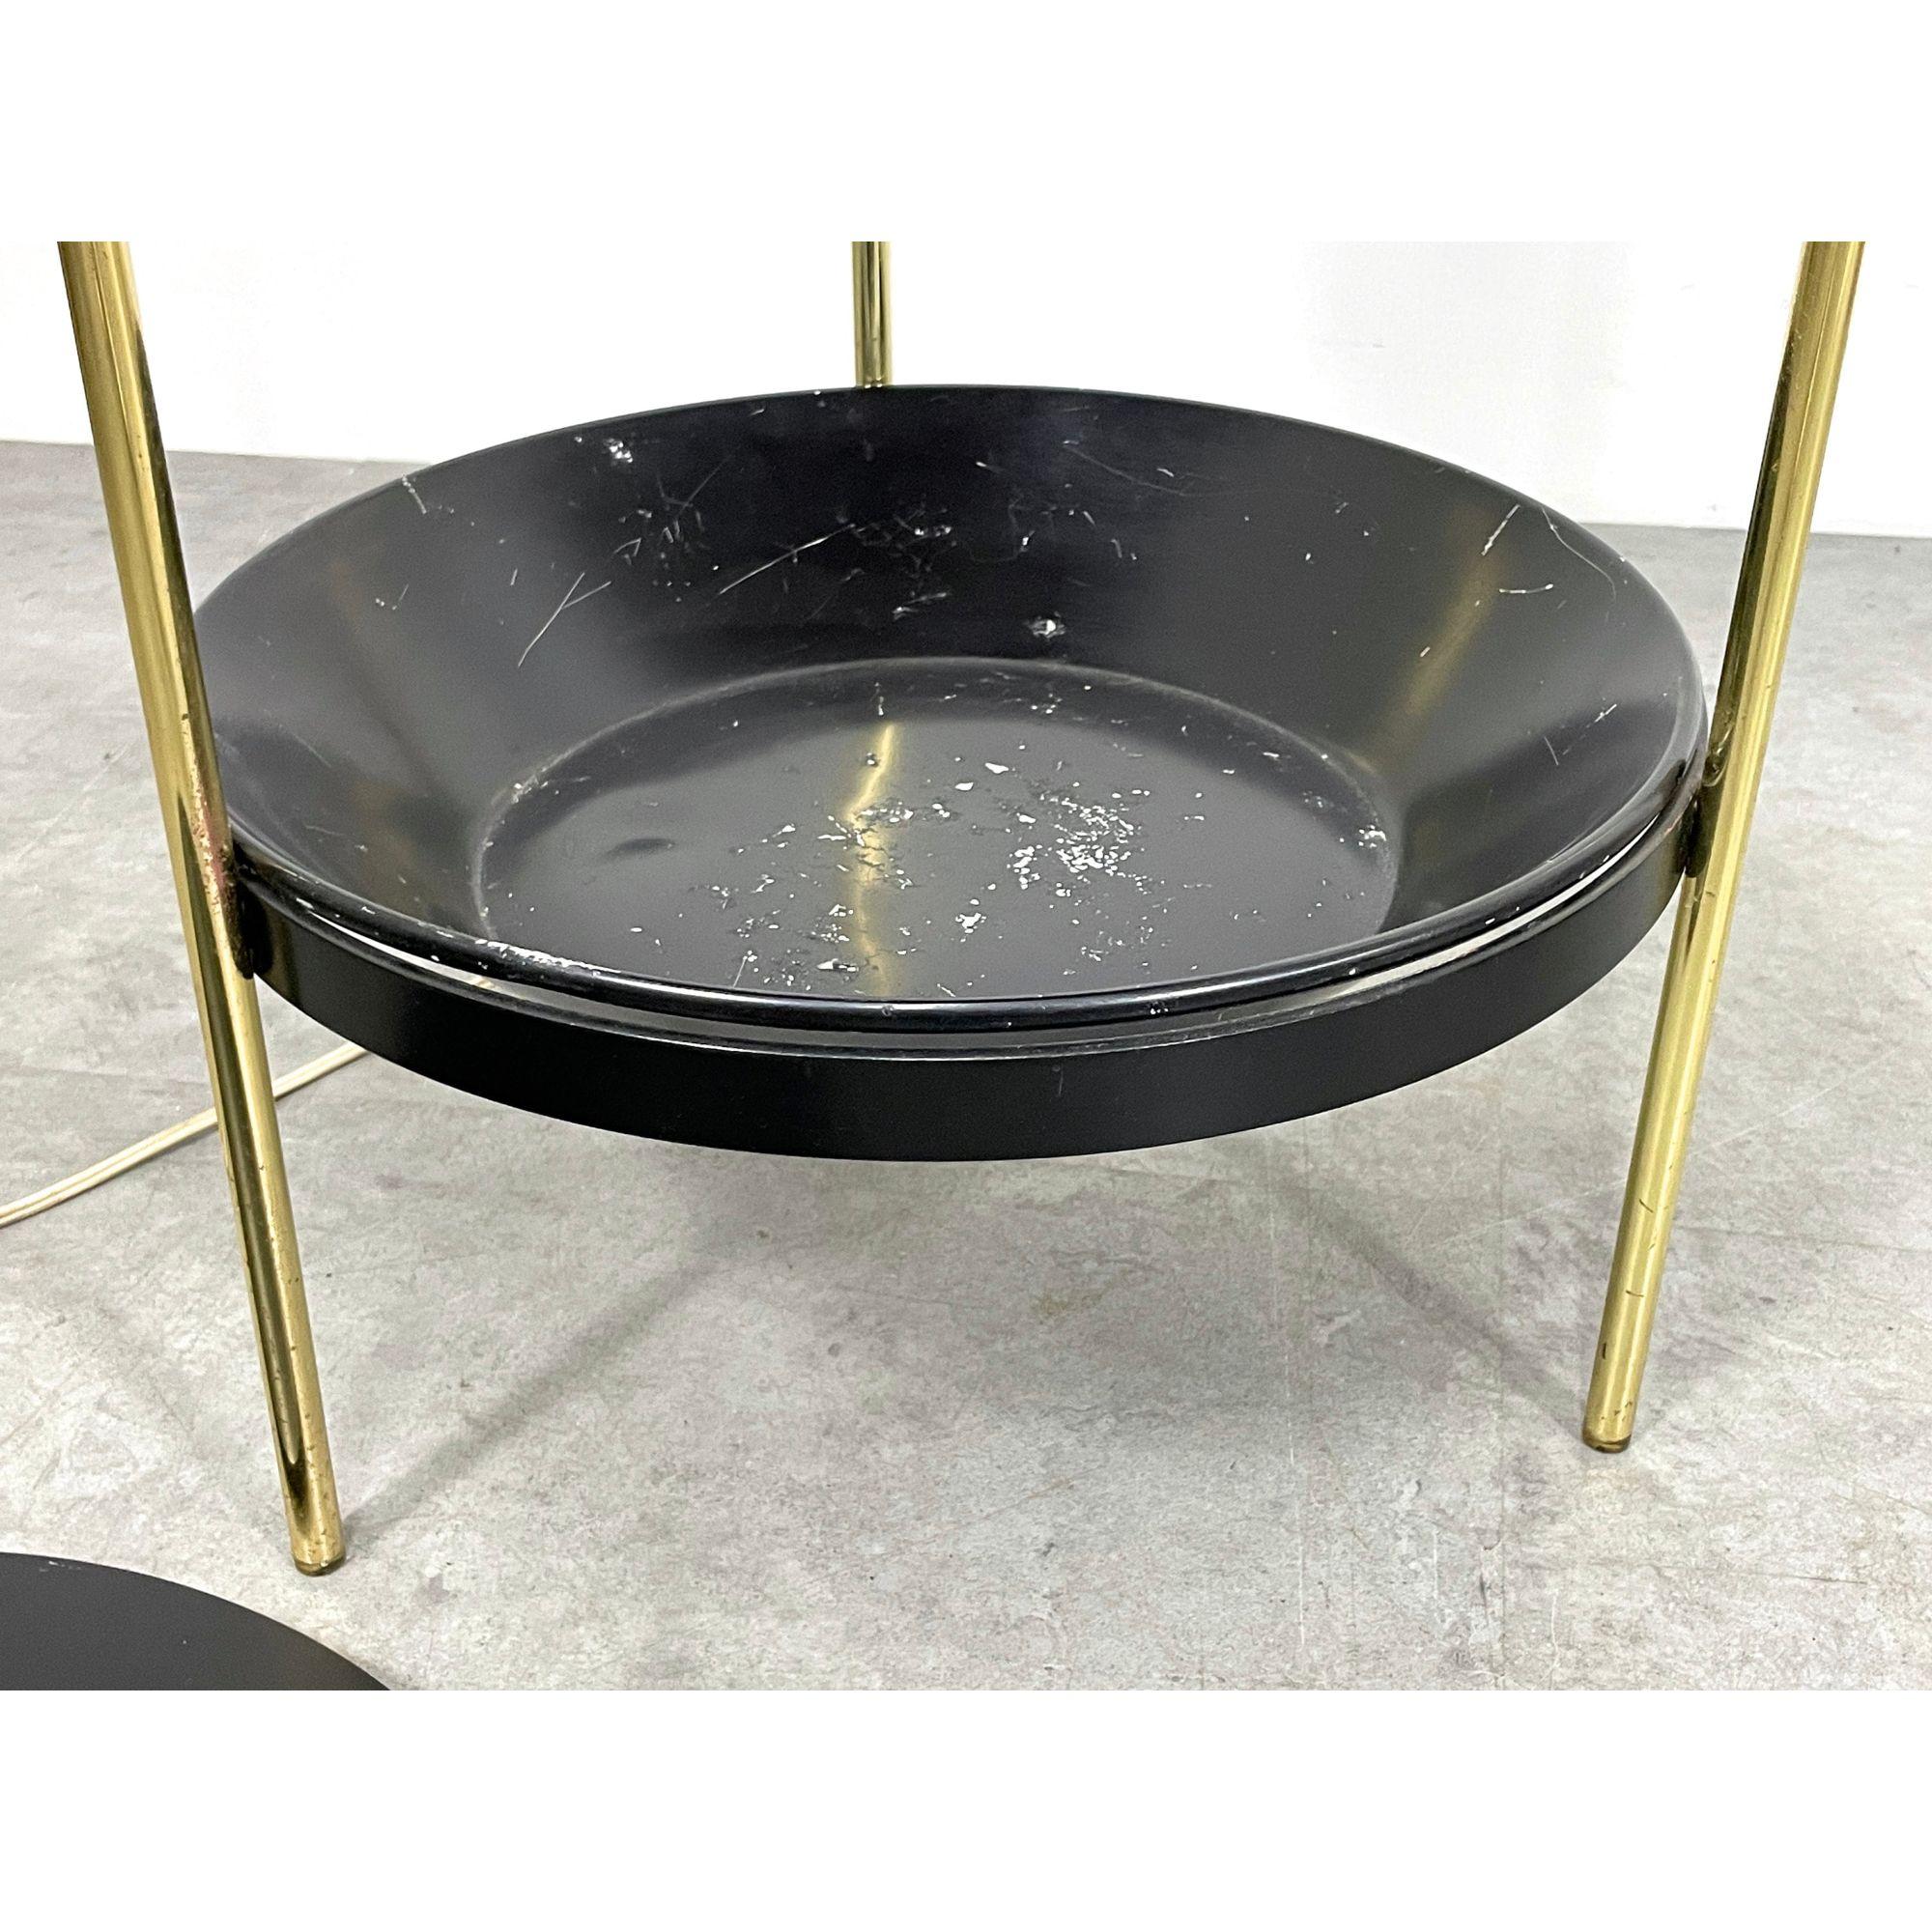 Mid Century Modern Vintage Brass Floor Lamp with Shelves by Laurel, circa 1960s For Sale 3